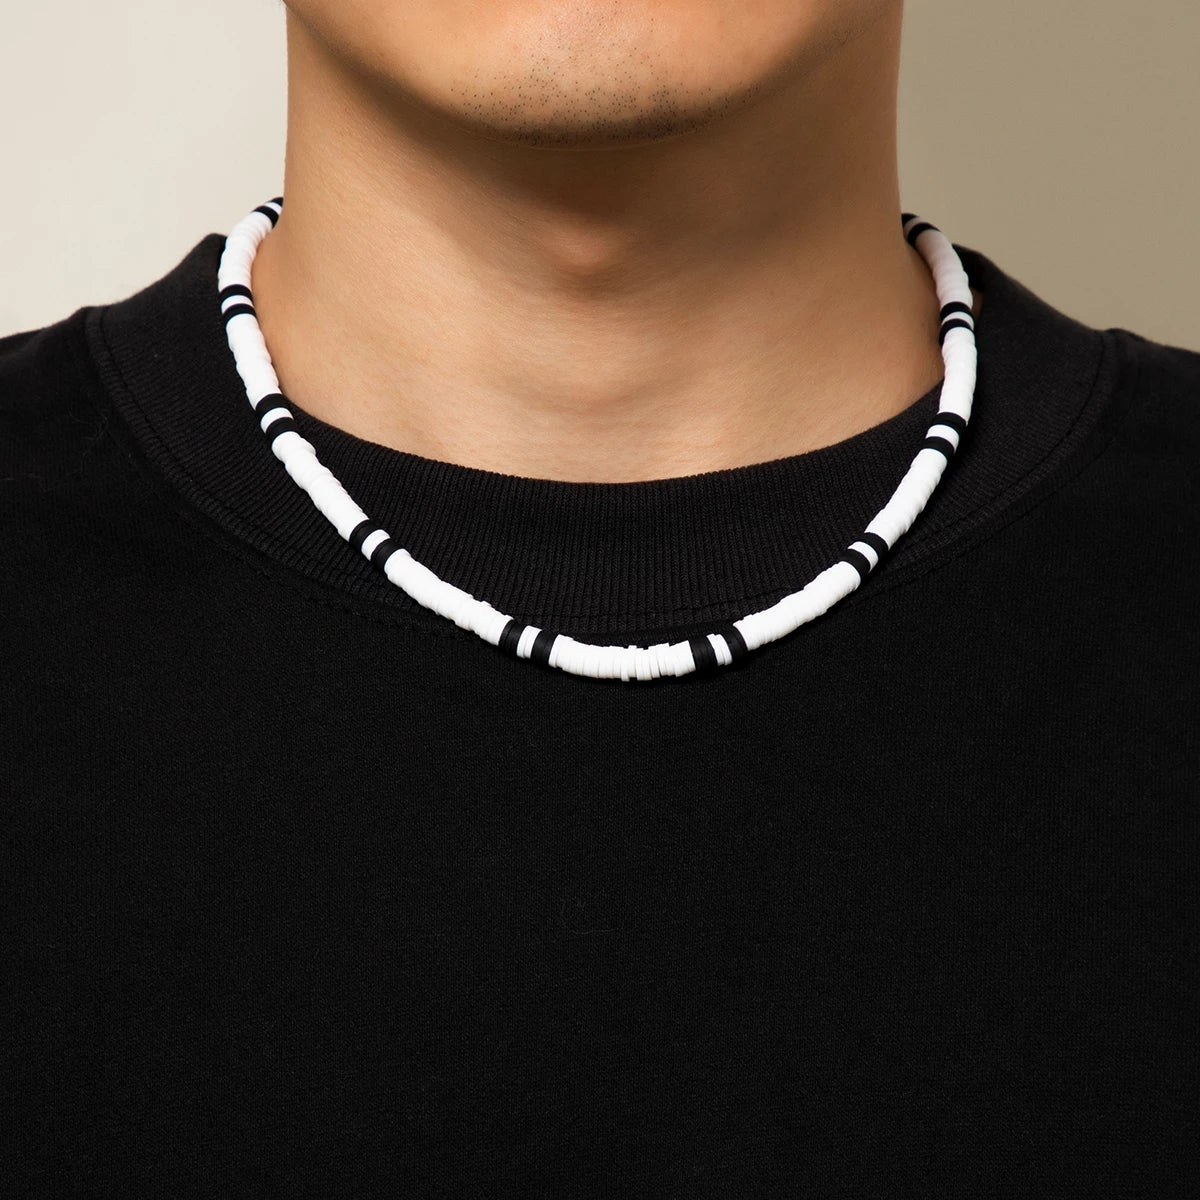 Beads Choker Necklace for Men